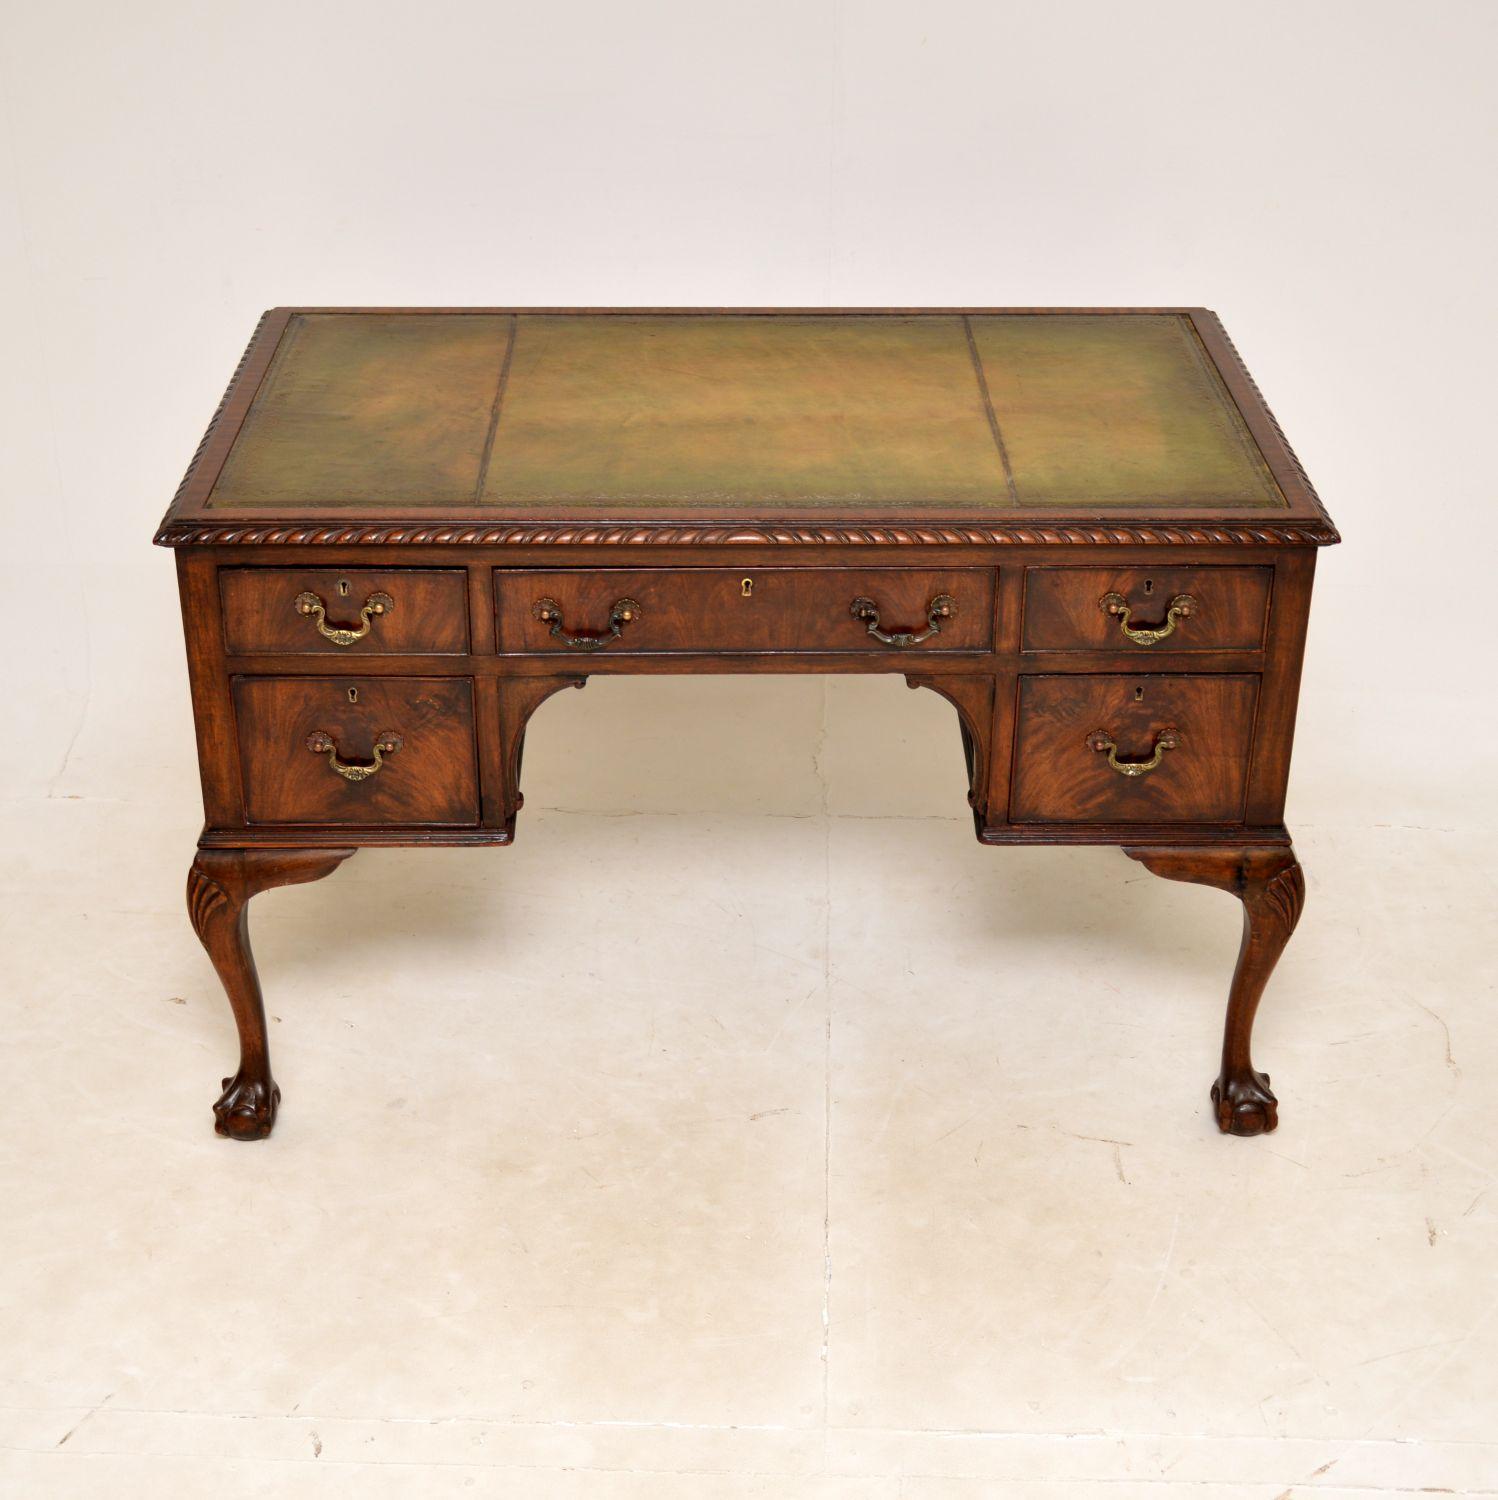 A fantastic antique desk in the Chippendale style. This was made in England, it dates from around the 1890-1910 period.

It is very well made, sitting on beautiful cabriole legs with shell carving at the knees, terminating in claw and ball feet. The